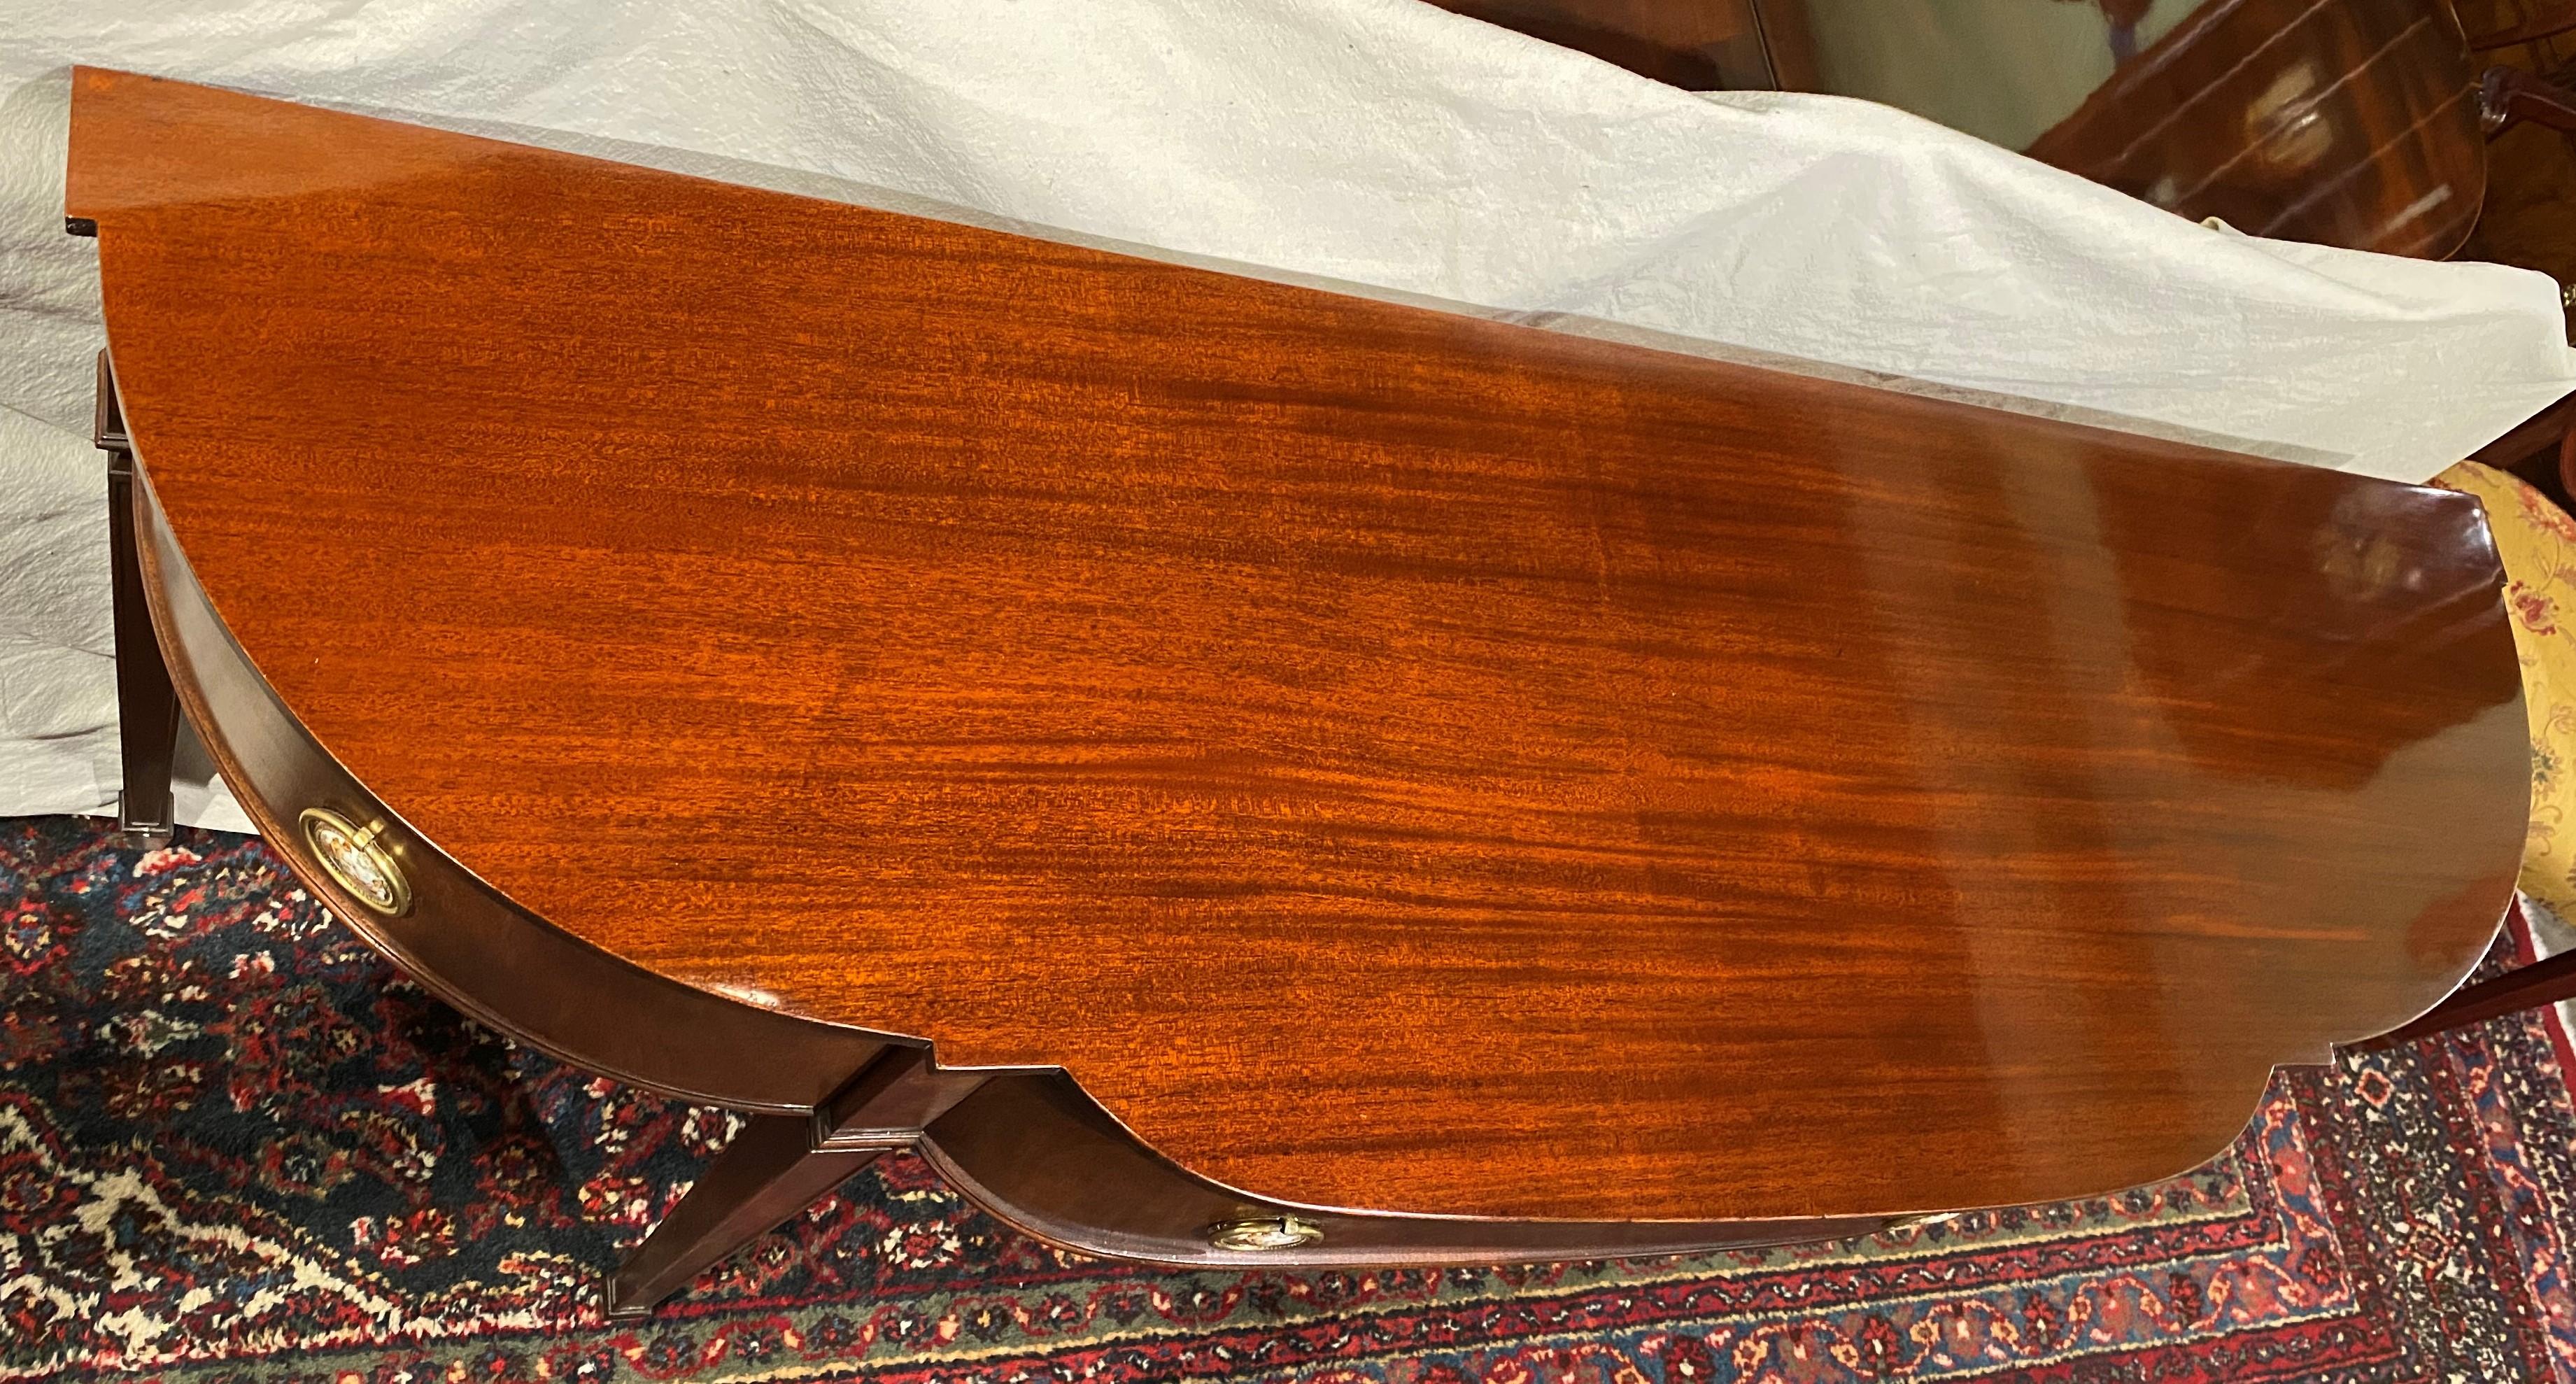 A finely made mahogany console table or server in the Hepplewhite style manufactured for the Marlboro Manor furniture line of H. Sacks & Sons, Brookline, MA. The case has a single center frieze drawer flanked by two conforming doors, opening to